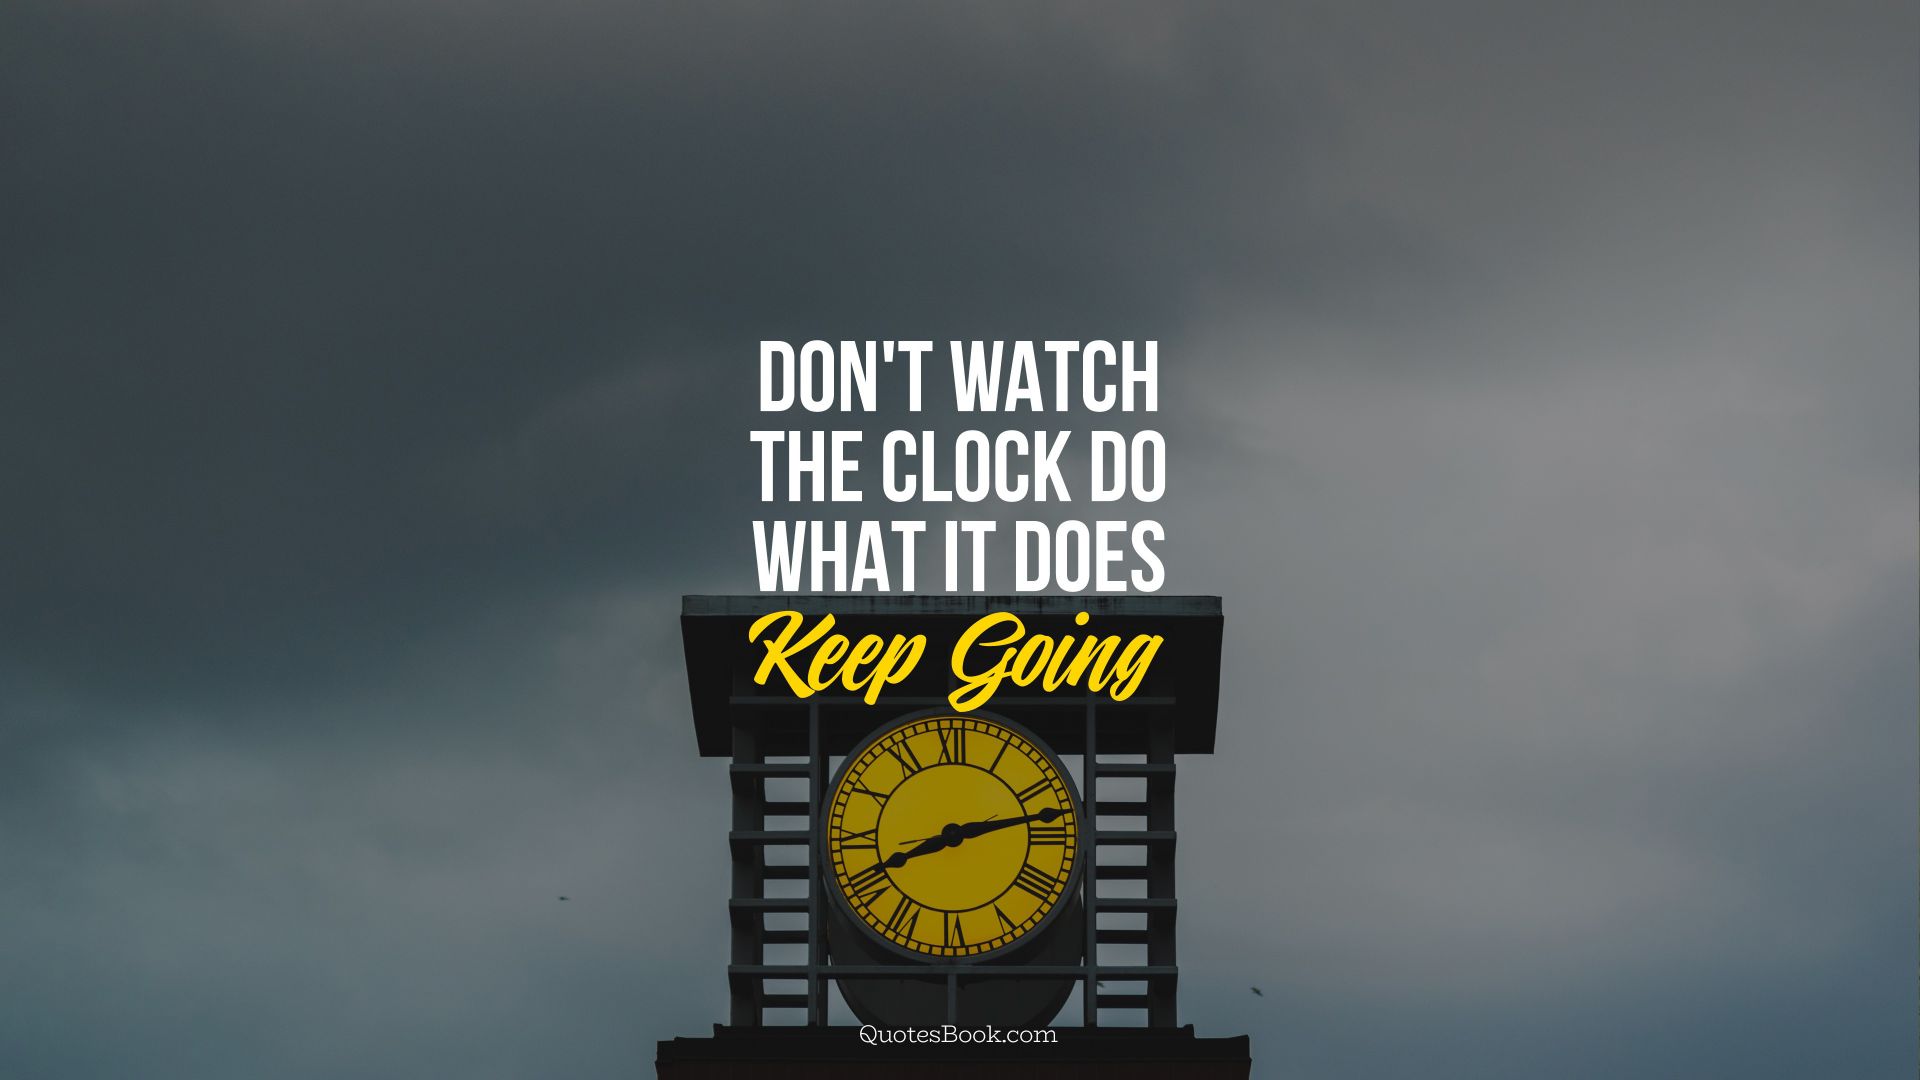 Don't watch the clock do what it does.
Keep going